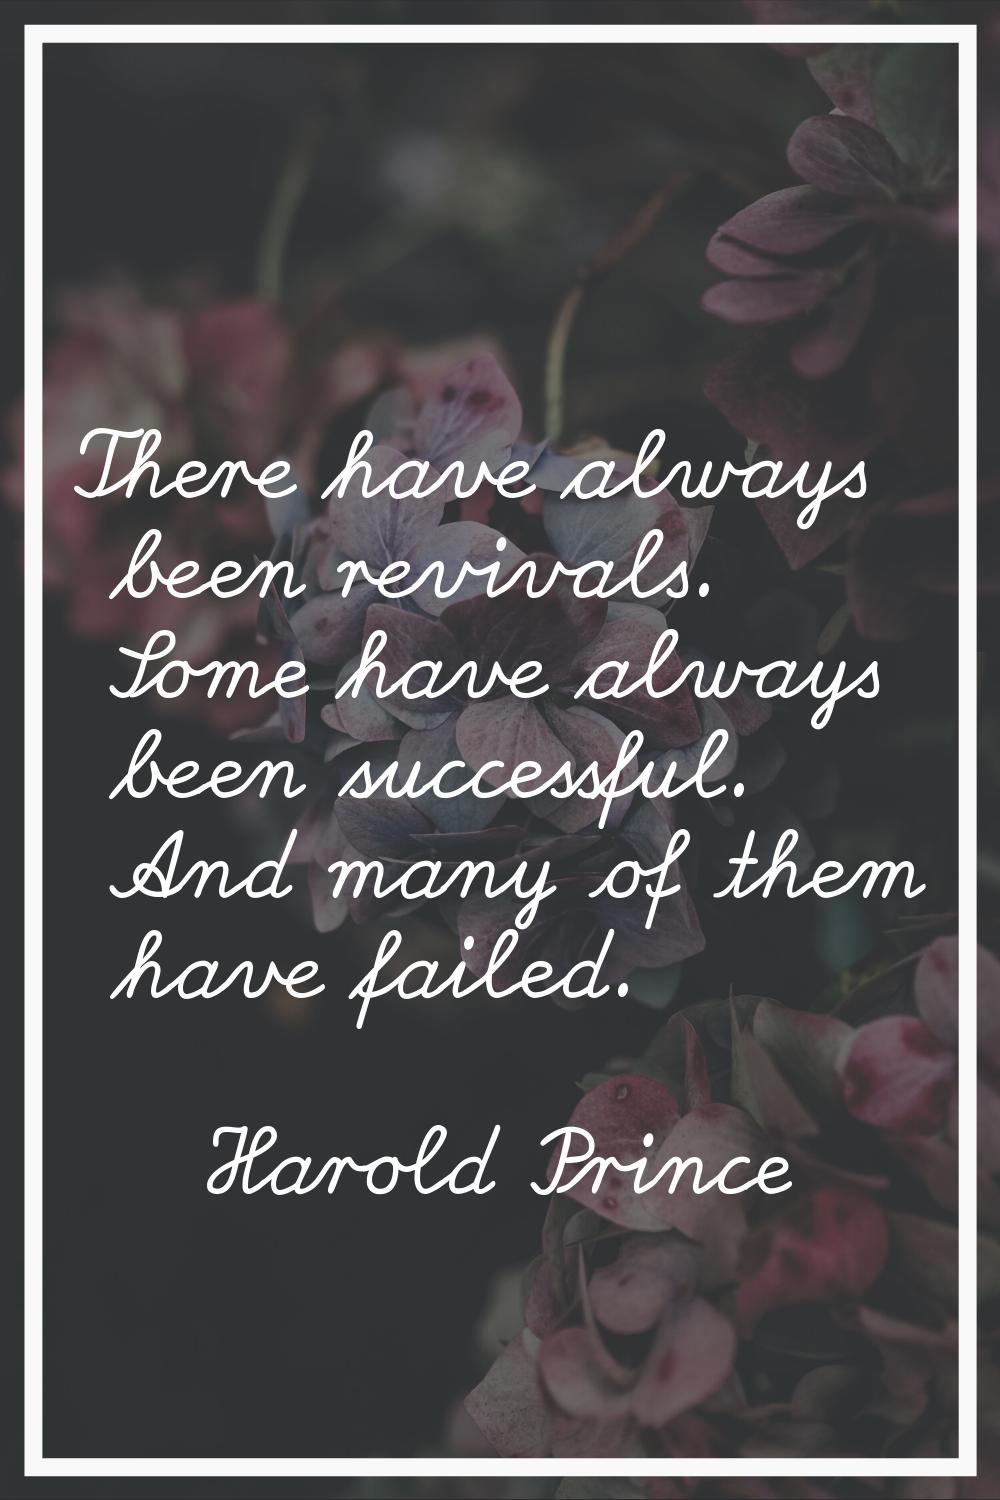 There have always been revivals. Some have always been successful. And many of them have failed.